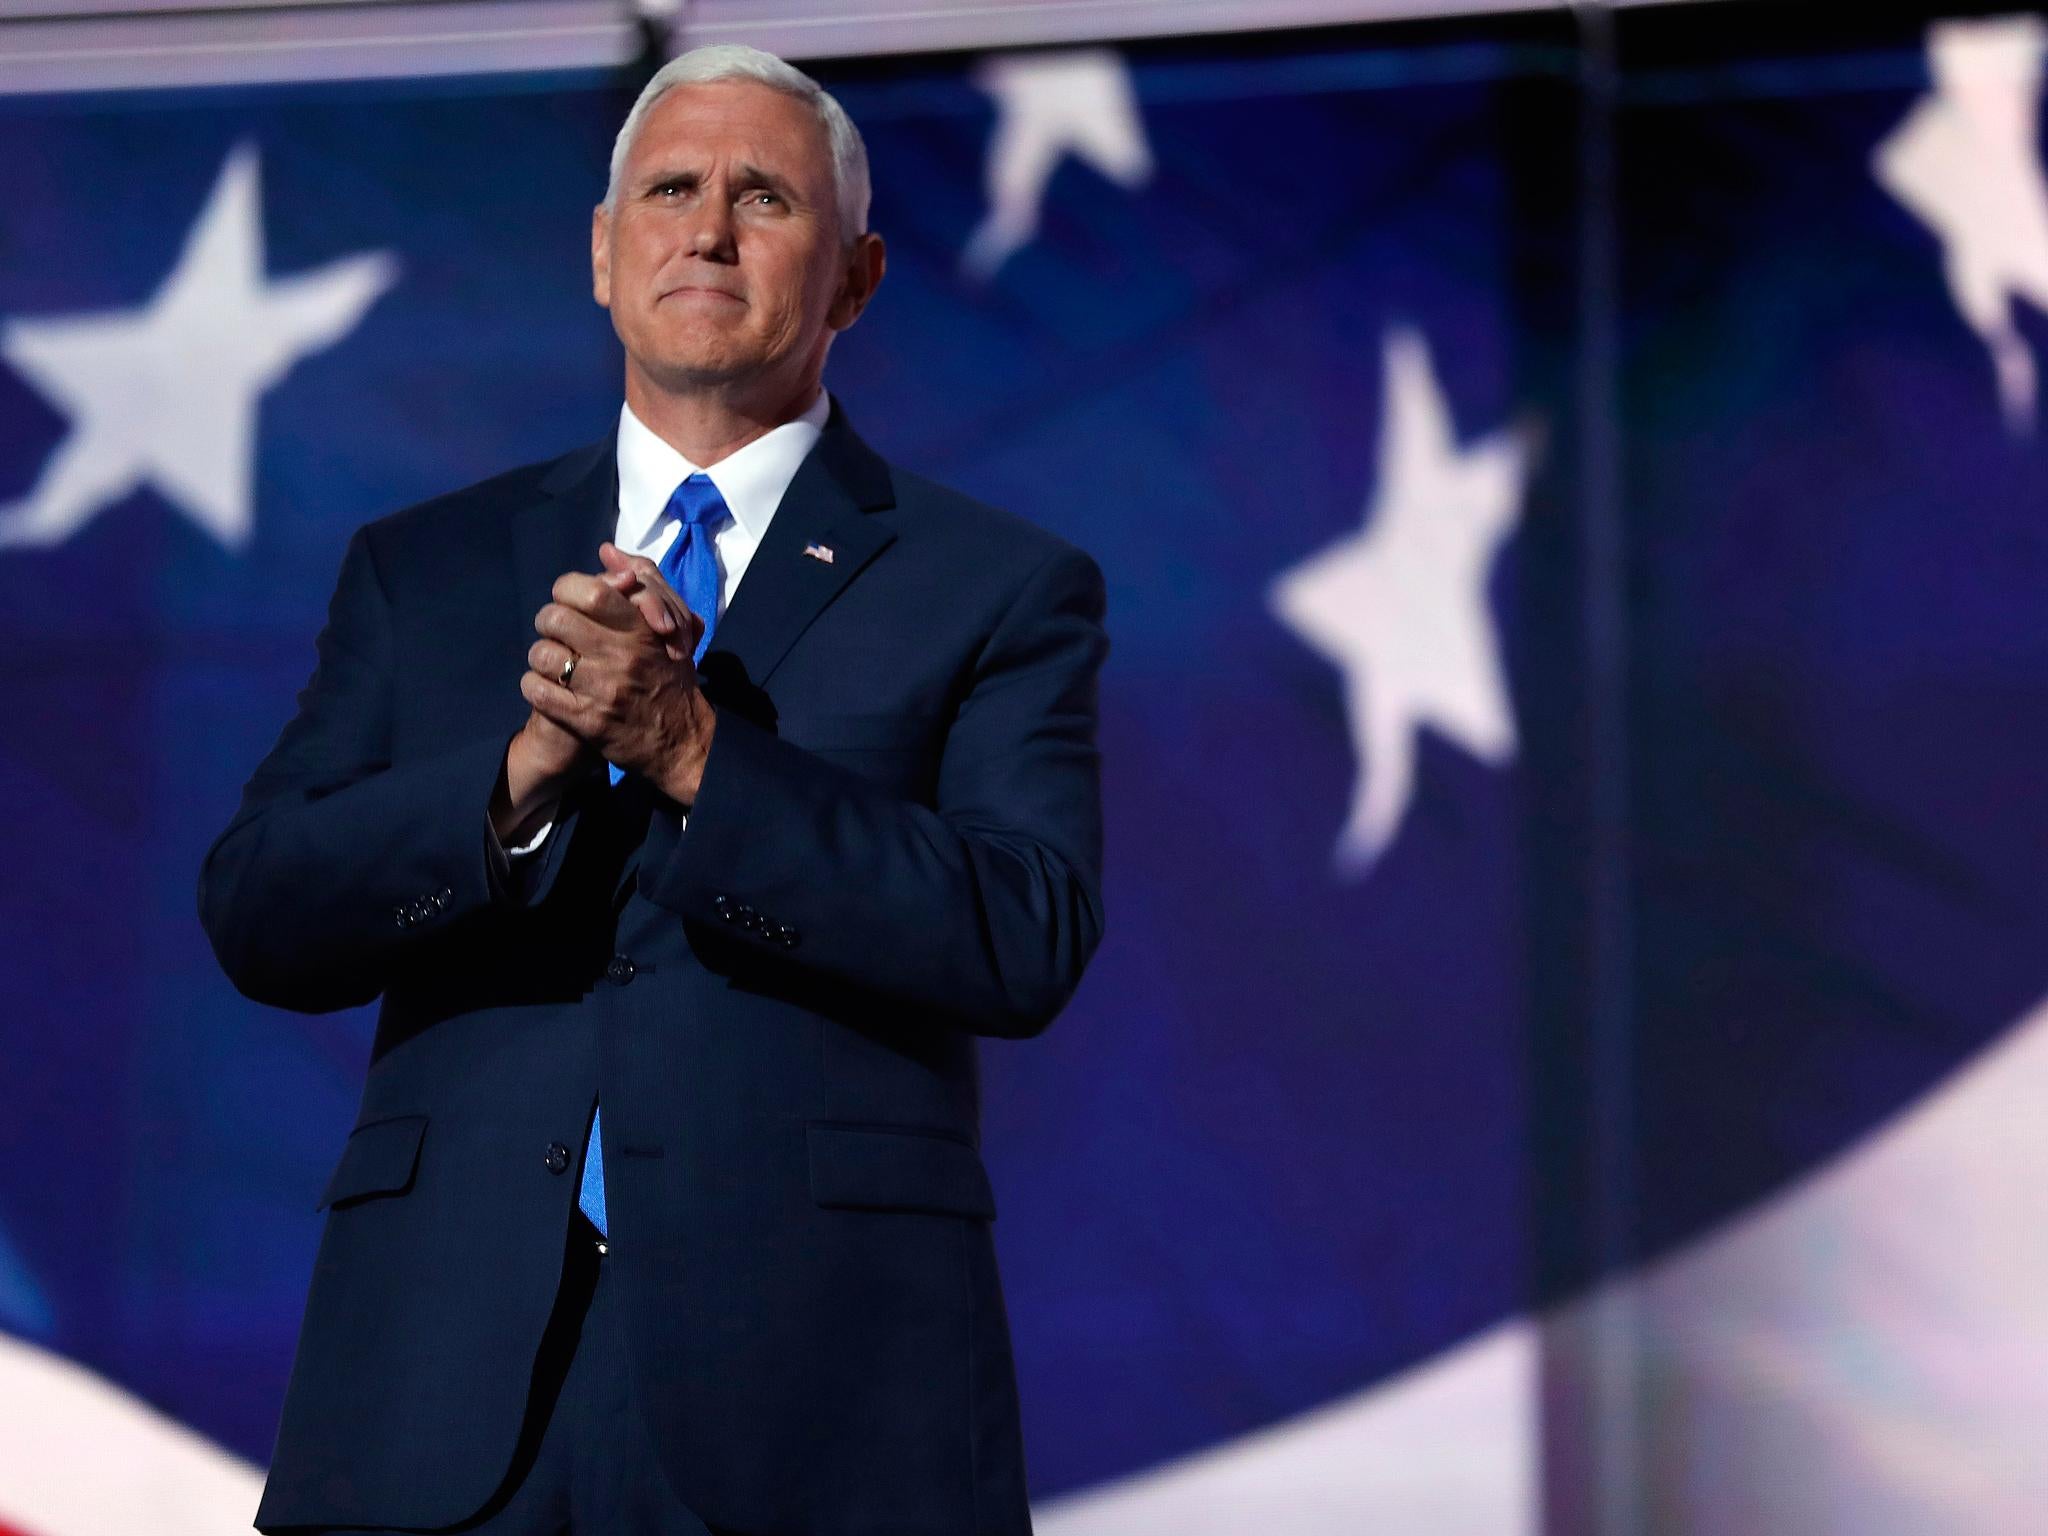 Vice Presidential candidate Pence addresses audience at GOP convention <em>AP</em>